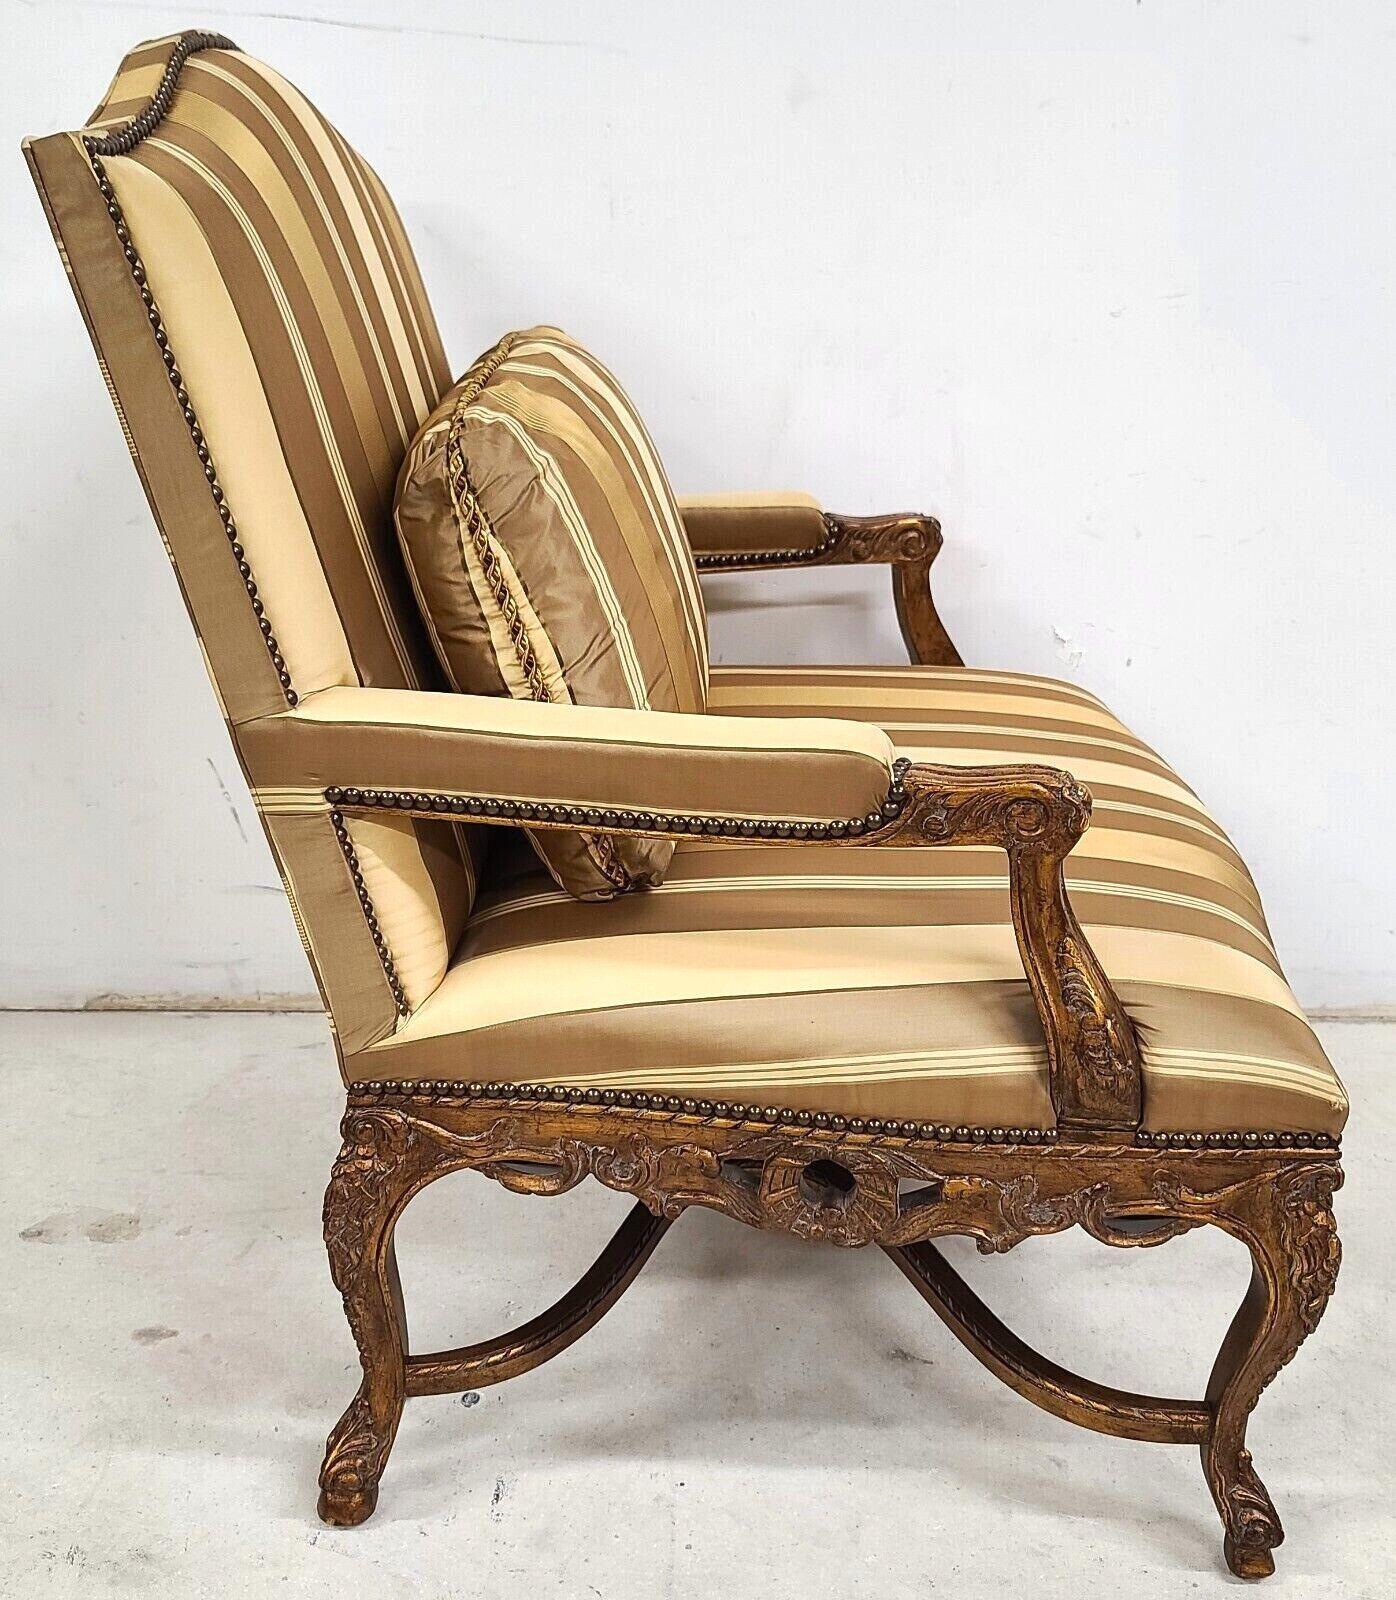 For FULL item description be sure to click on CONTINUE READING at the bottom of this listing.

Offering one of our recent palm beach estate fine furniture acquisitions of a French provincial Louis xv giltwood bergere armchair by Robb